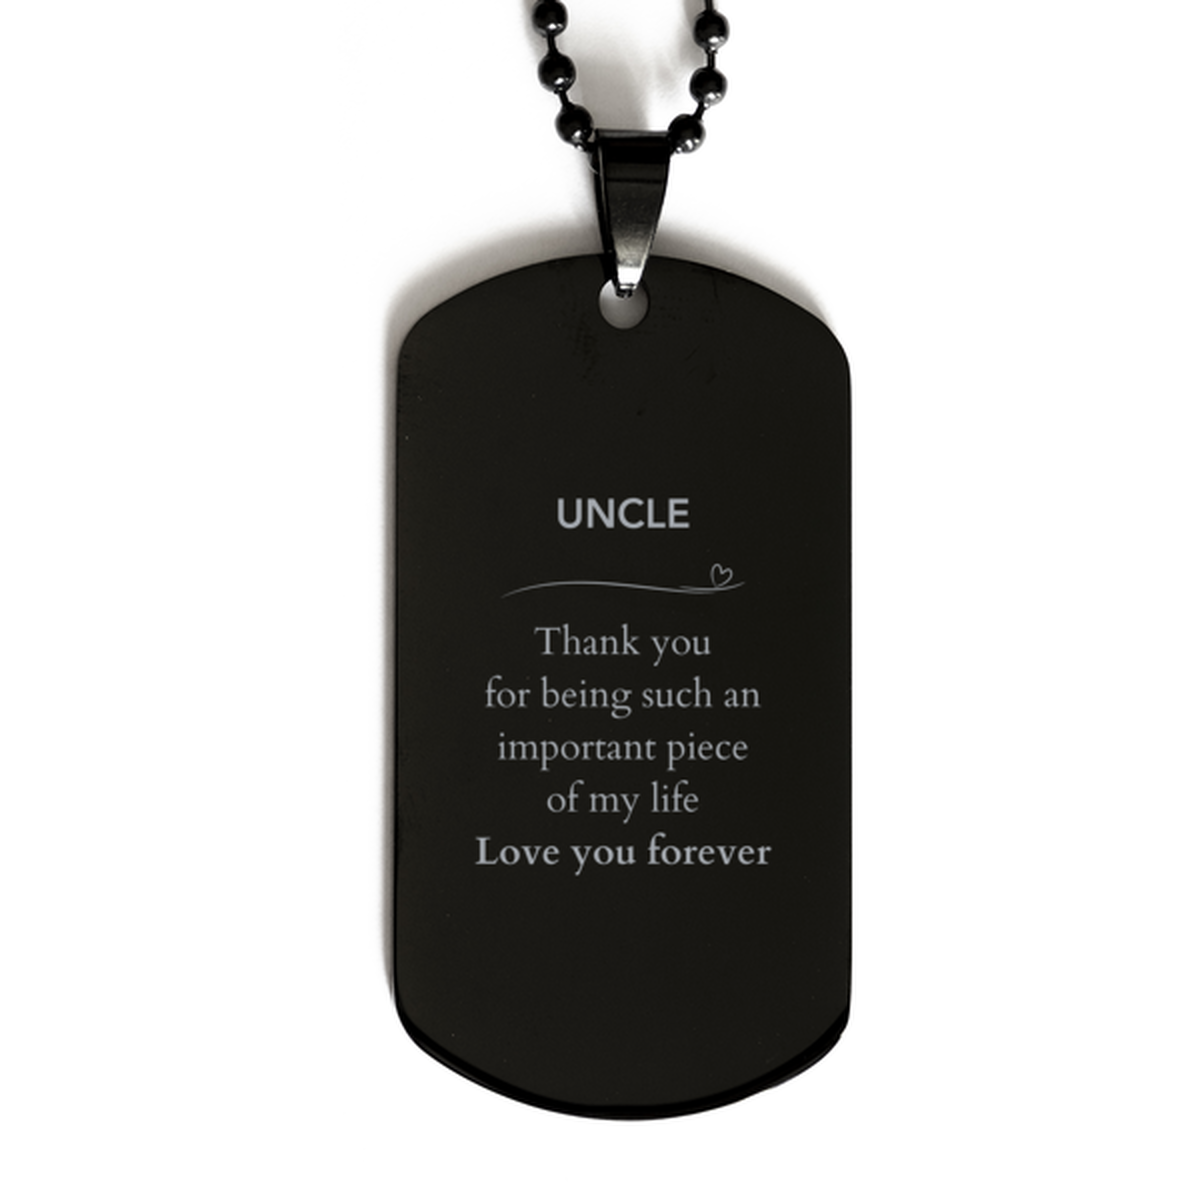 Appropriate Uncle Black Dog Tag Epic Birthday Gifts for Uncle Thank you for being such an important piece of my life Uncle Christmas Mothers Fathers Day